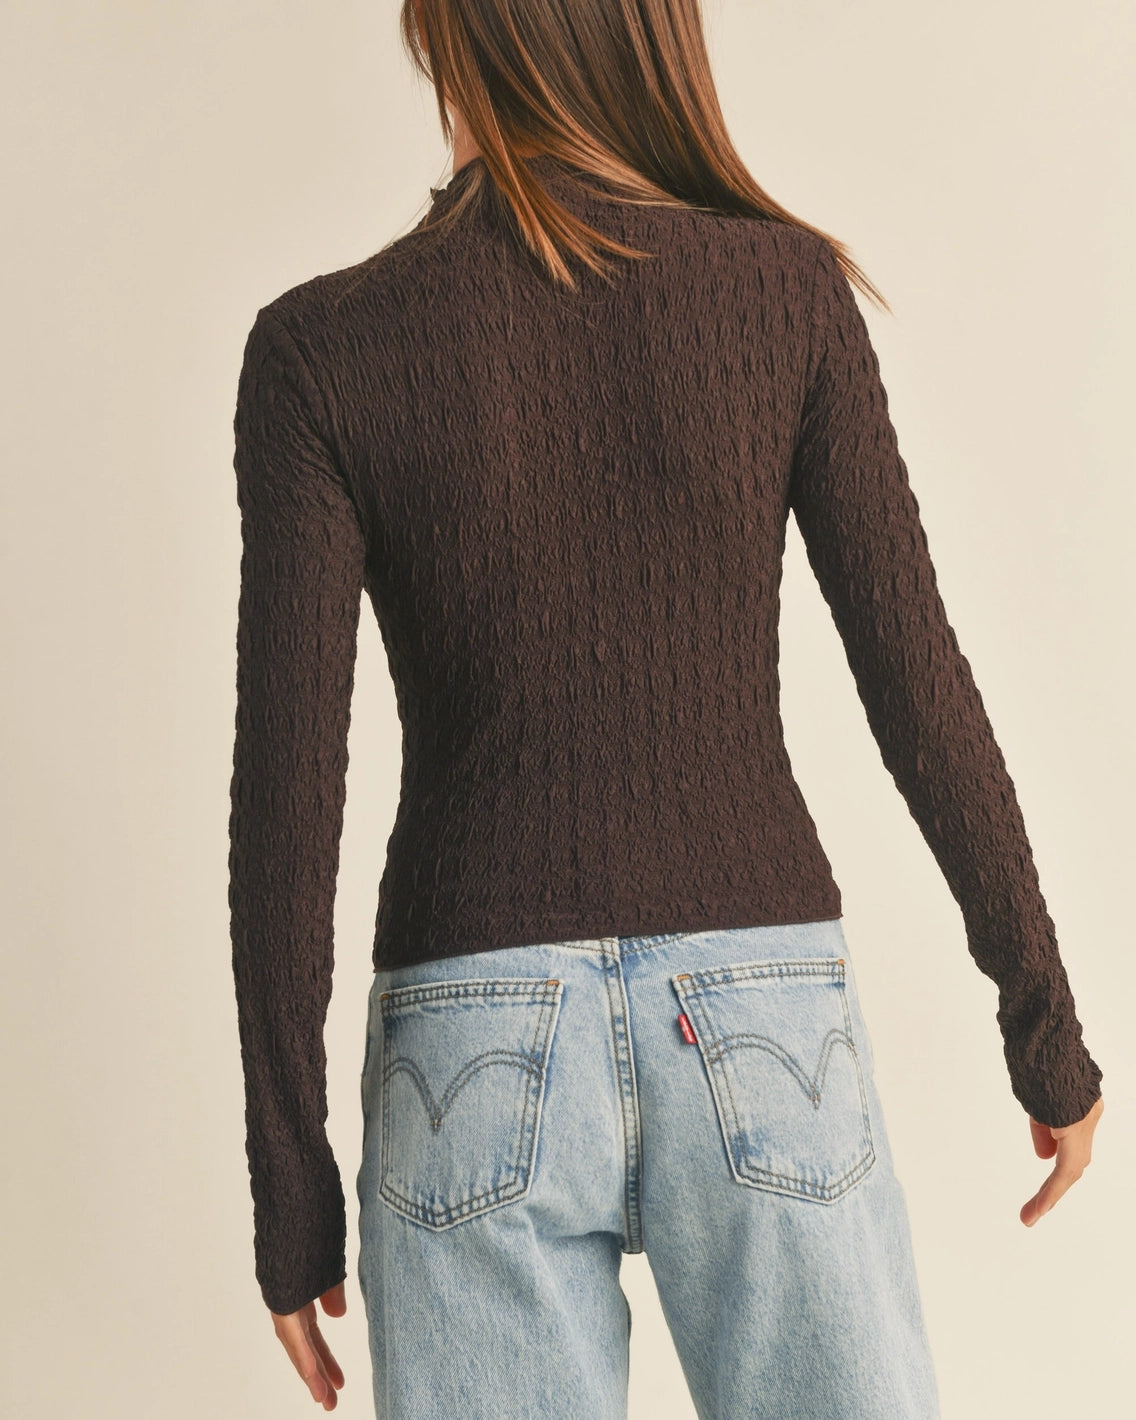 New York Cropped Long Sleeve Top - Brown